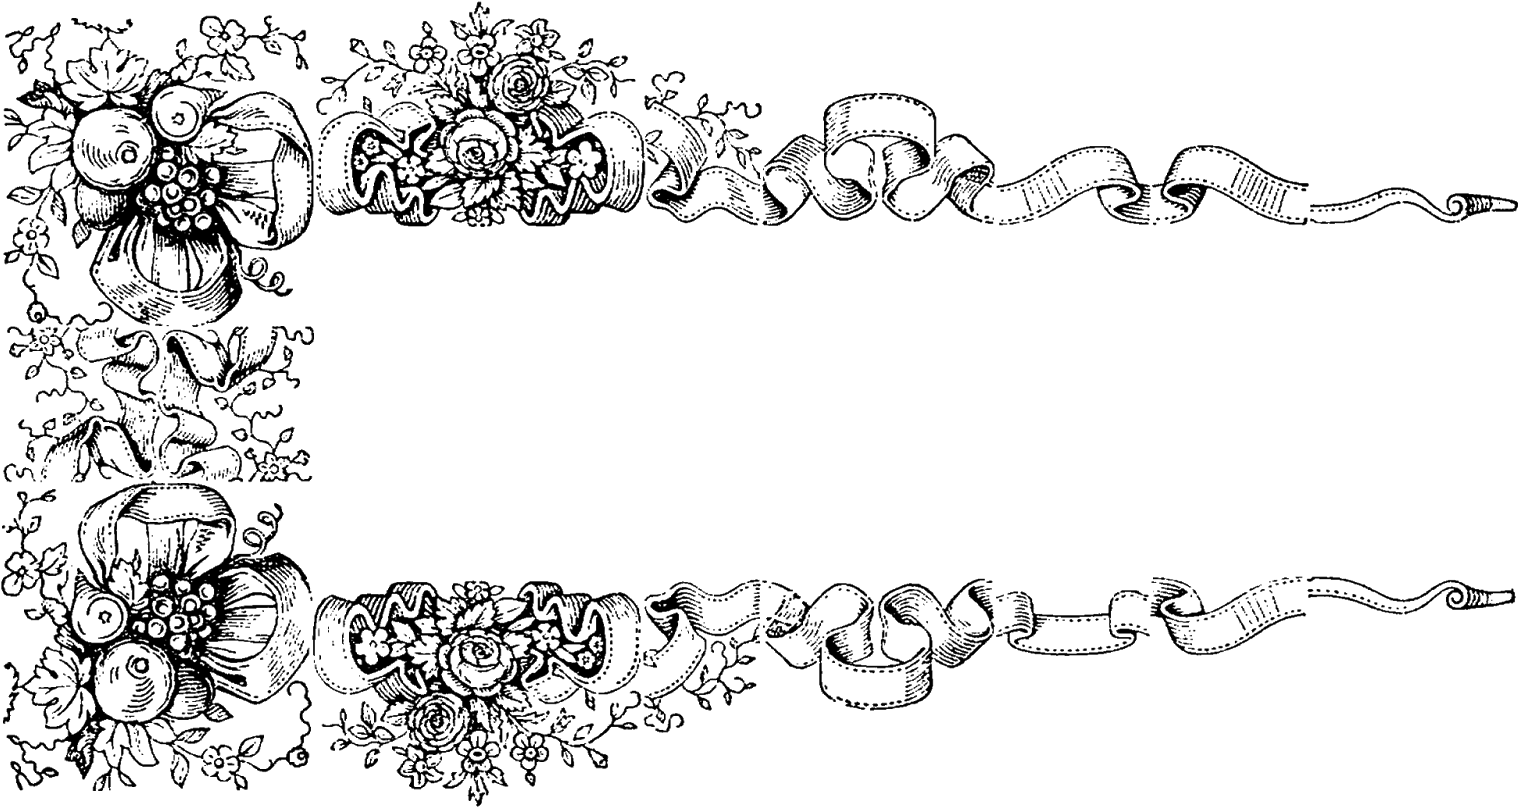 A Black Rectangle With A Black Background